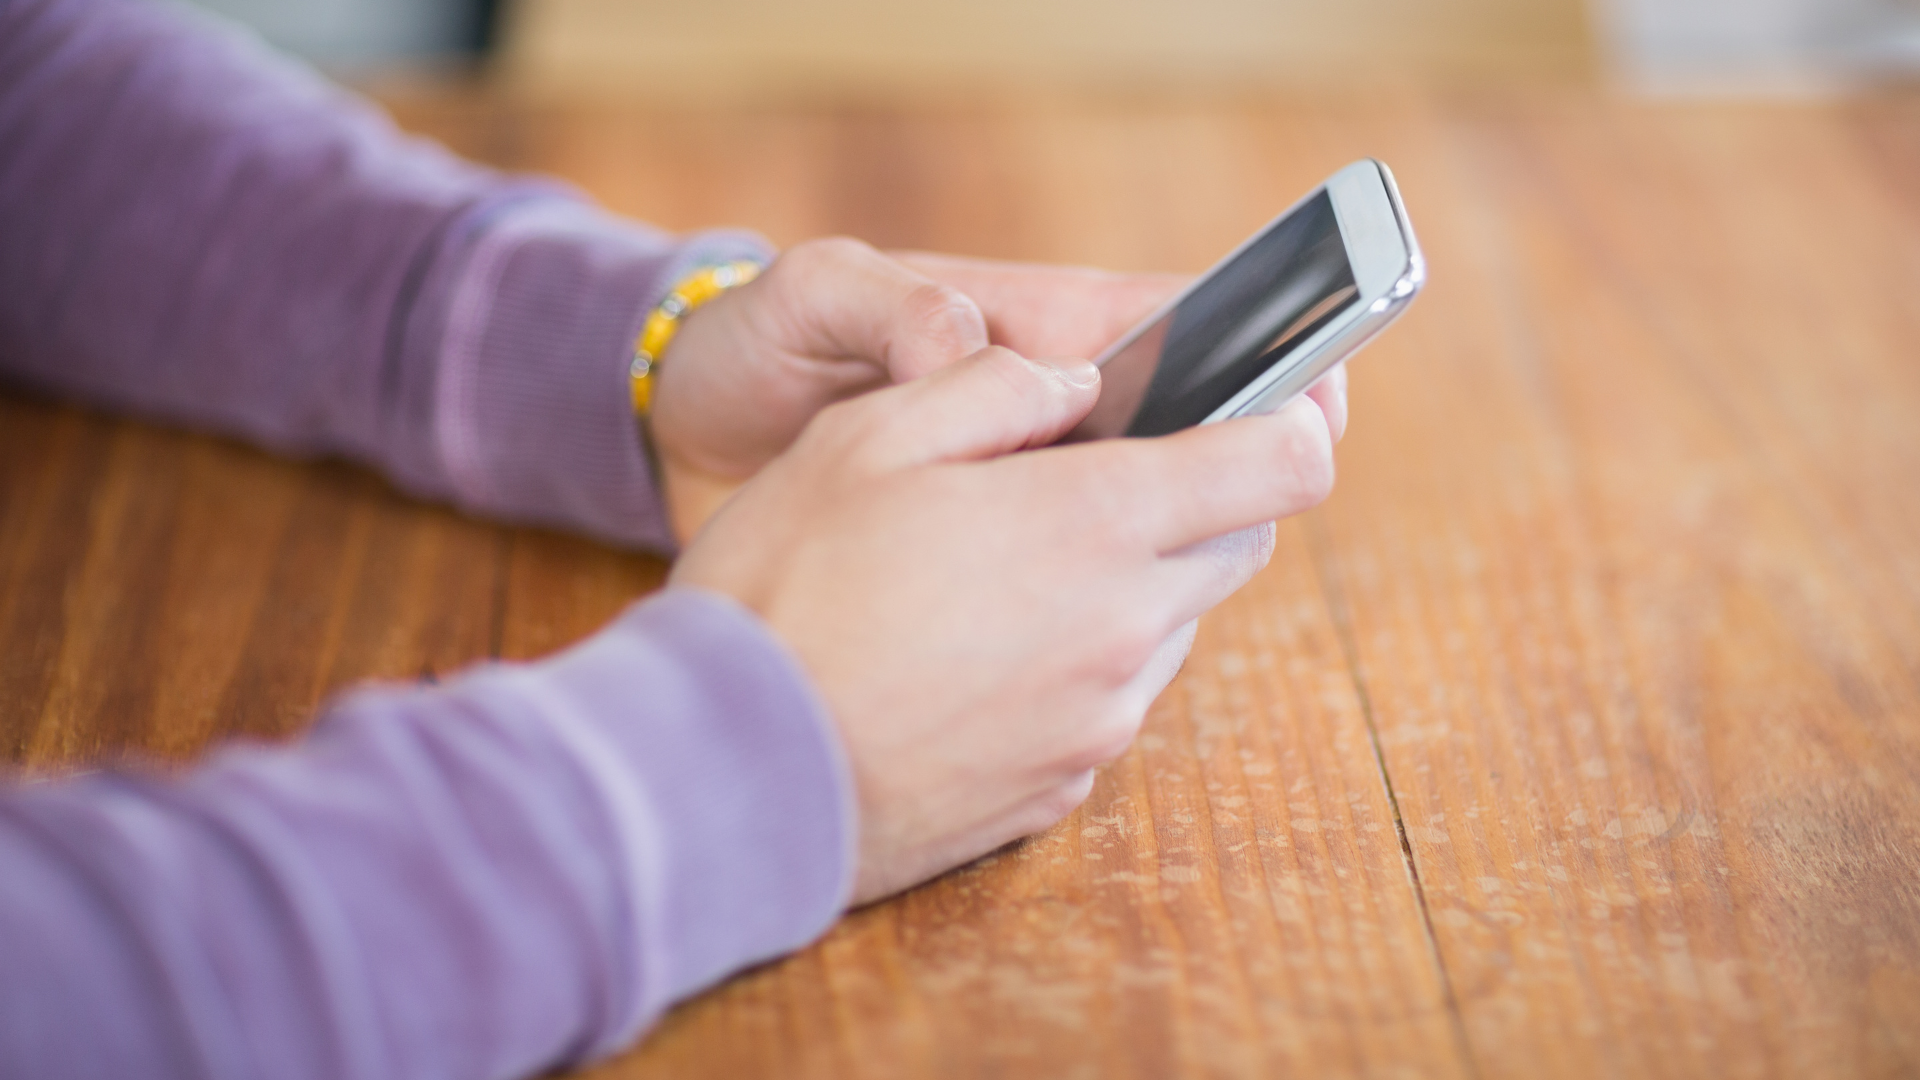 Using Mobile to Make Parent Communication More Meaningful